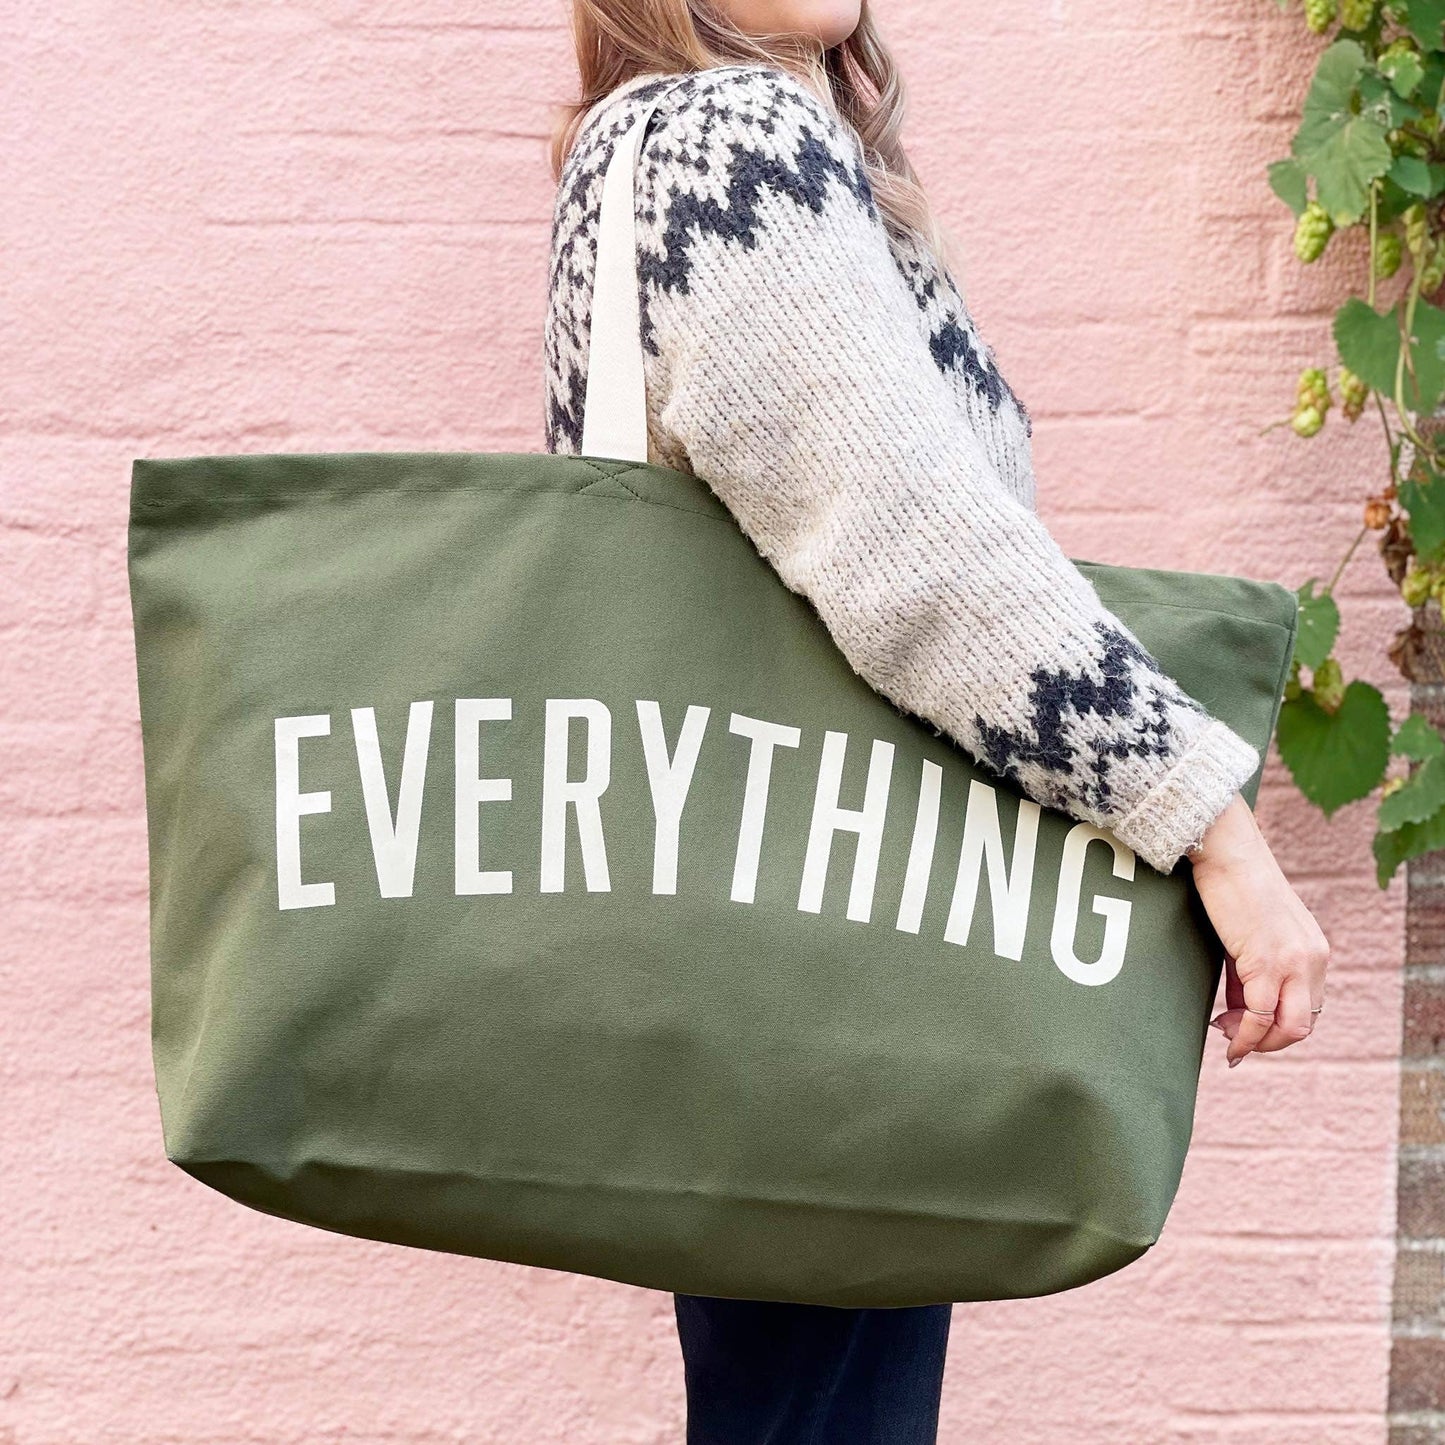 Alphabet Bags - Everything - Olive Green REALLY Big Bag